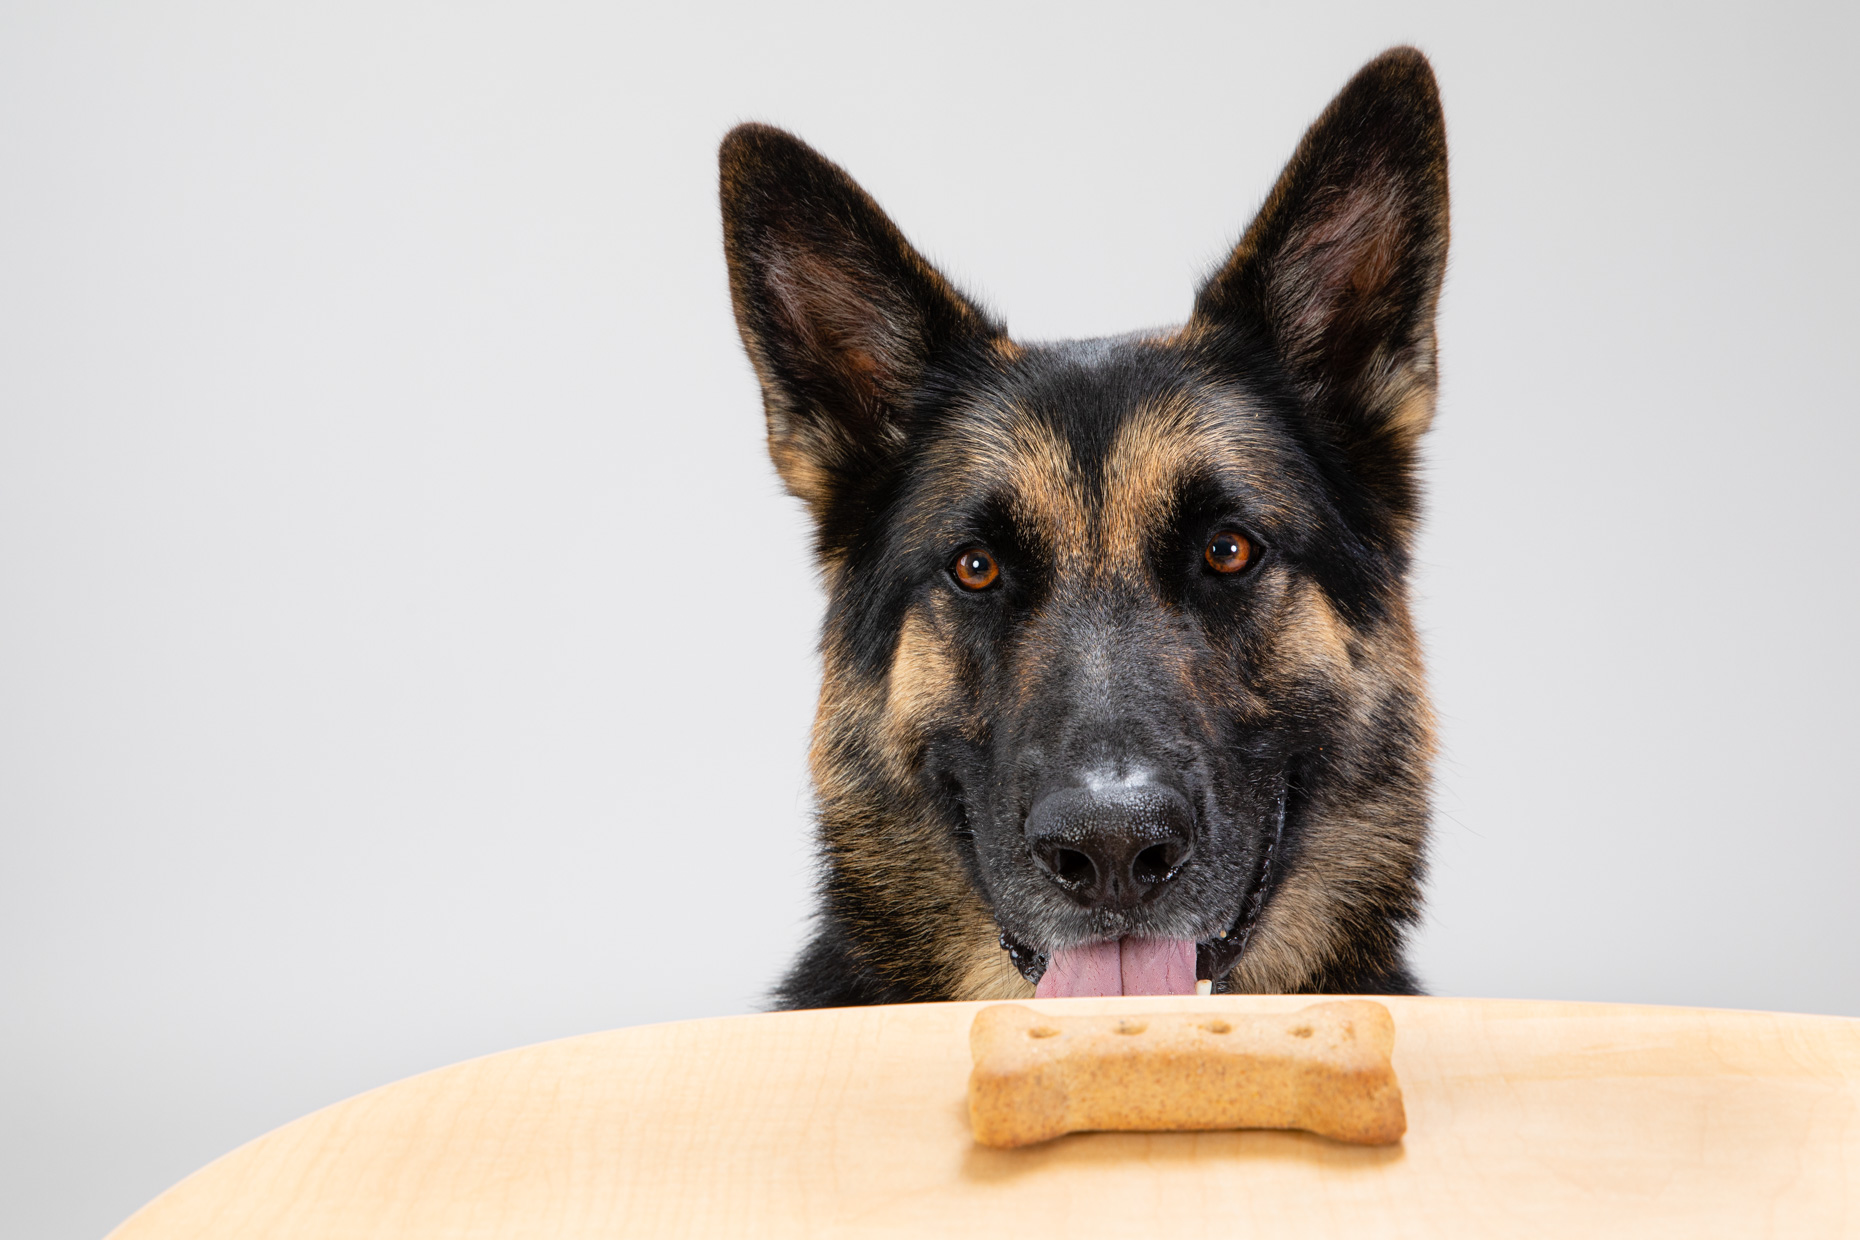 Dog Lifestyle Photography | German Shepherd and Treat by Mark Rogers